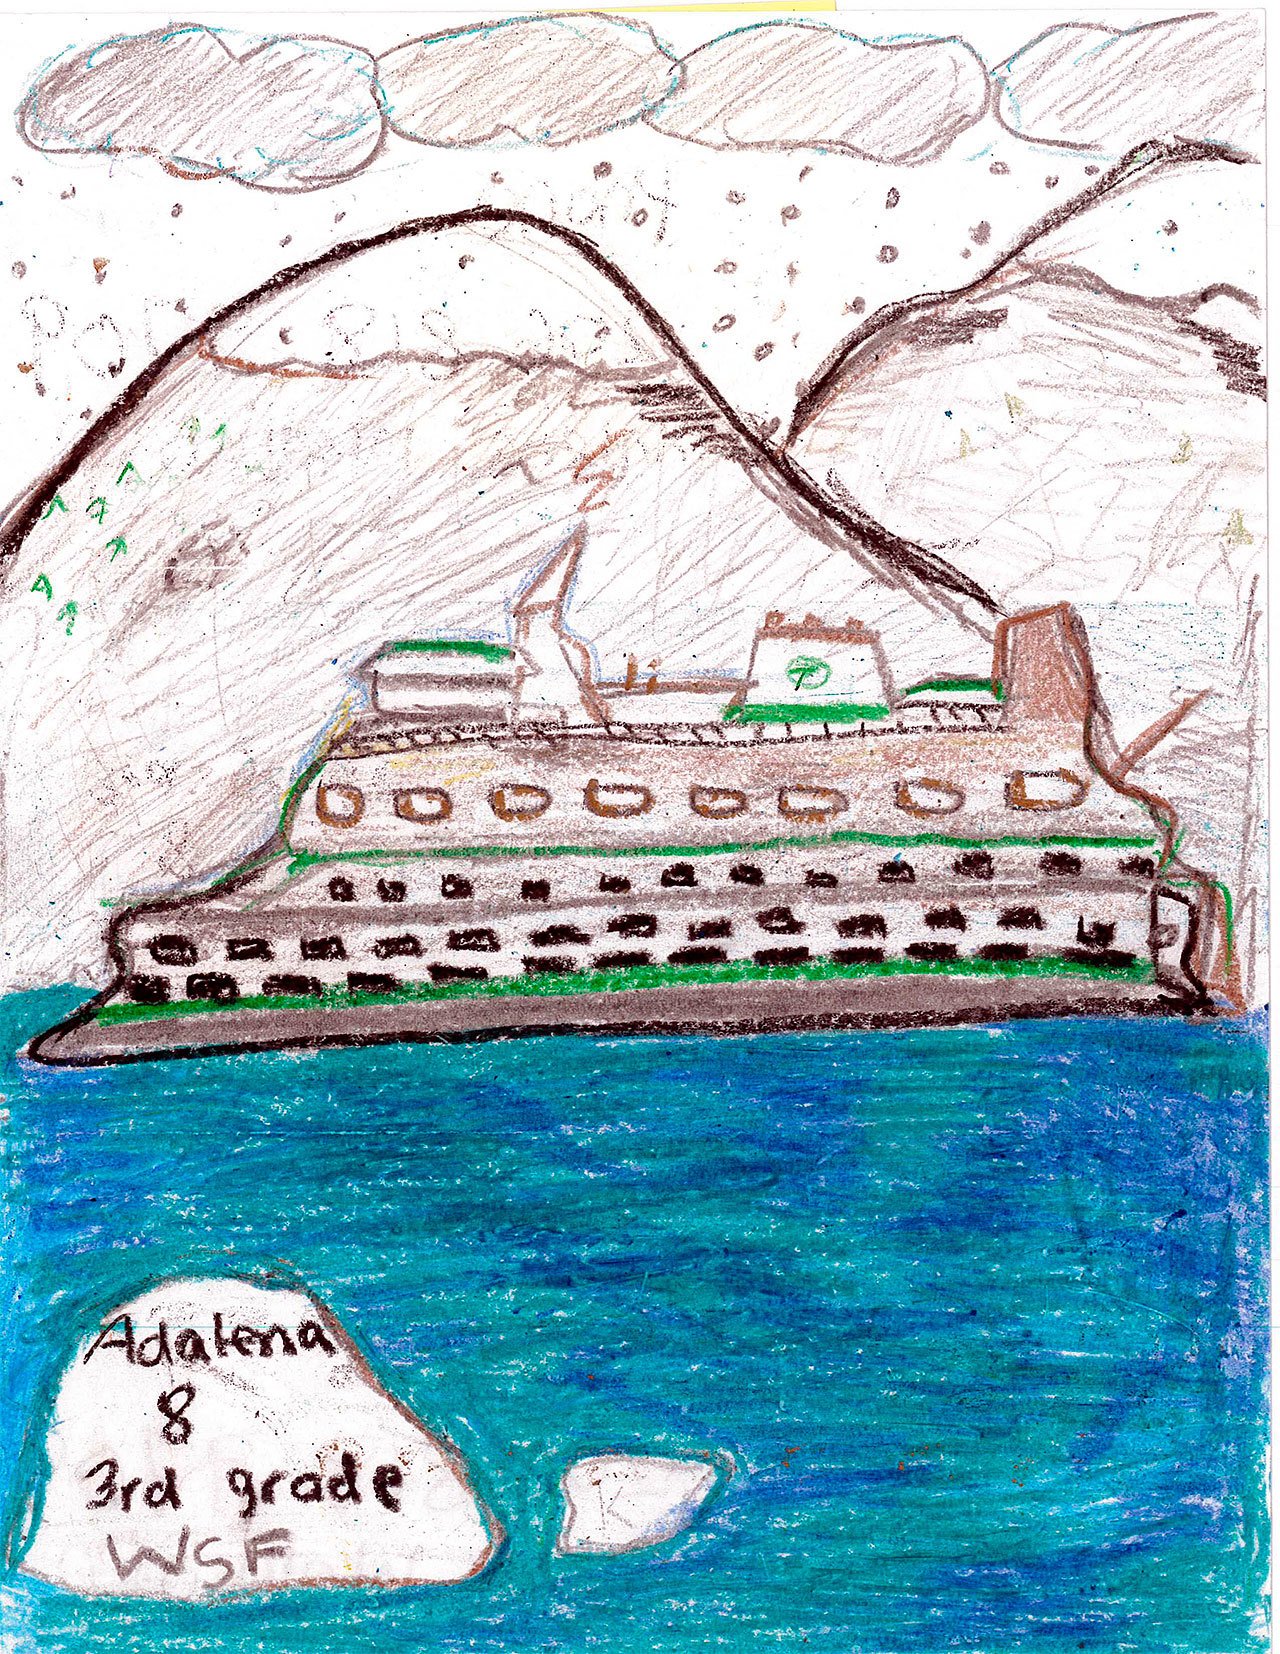 Third-grader Adalena Walhoff, 8, of Edmonds, was named one of four finalists in the Washington State Ferries winter schedule cover contest. (Contributed)